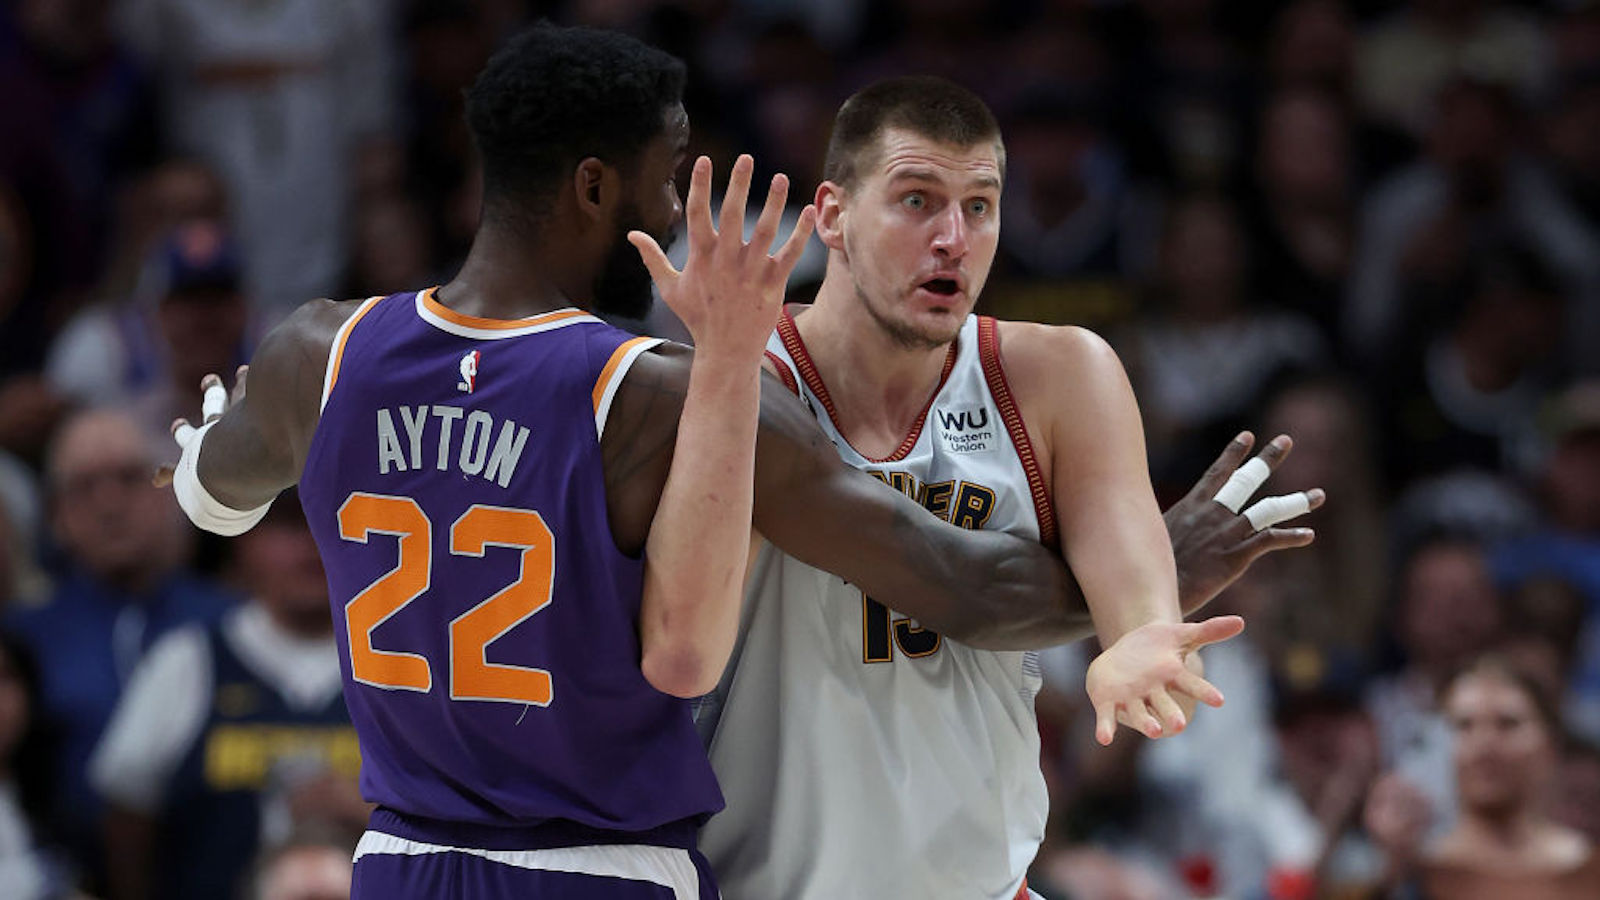 DENVER, COLORADO - MAY 09: Nikola Jokic #15 of the Denver Nuggets looks for a call while being guarded by Deandre Ayton #22 of the Phoenix Suns in the third quarter during Game Five of the NBA Western Conference Semifinals at Ball Arena on May 09, 2023 in Denver, Colorado. NOTE TO USER: User expressly acknowledges and agrees that, by downloading and/or using this photograph, User is consenting to the terms and conditions of the Getty Images License Agreement.